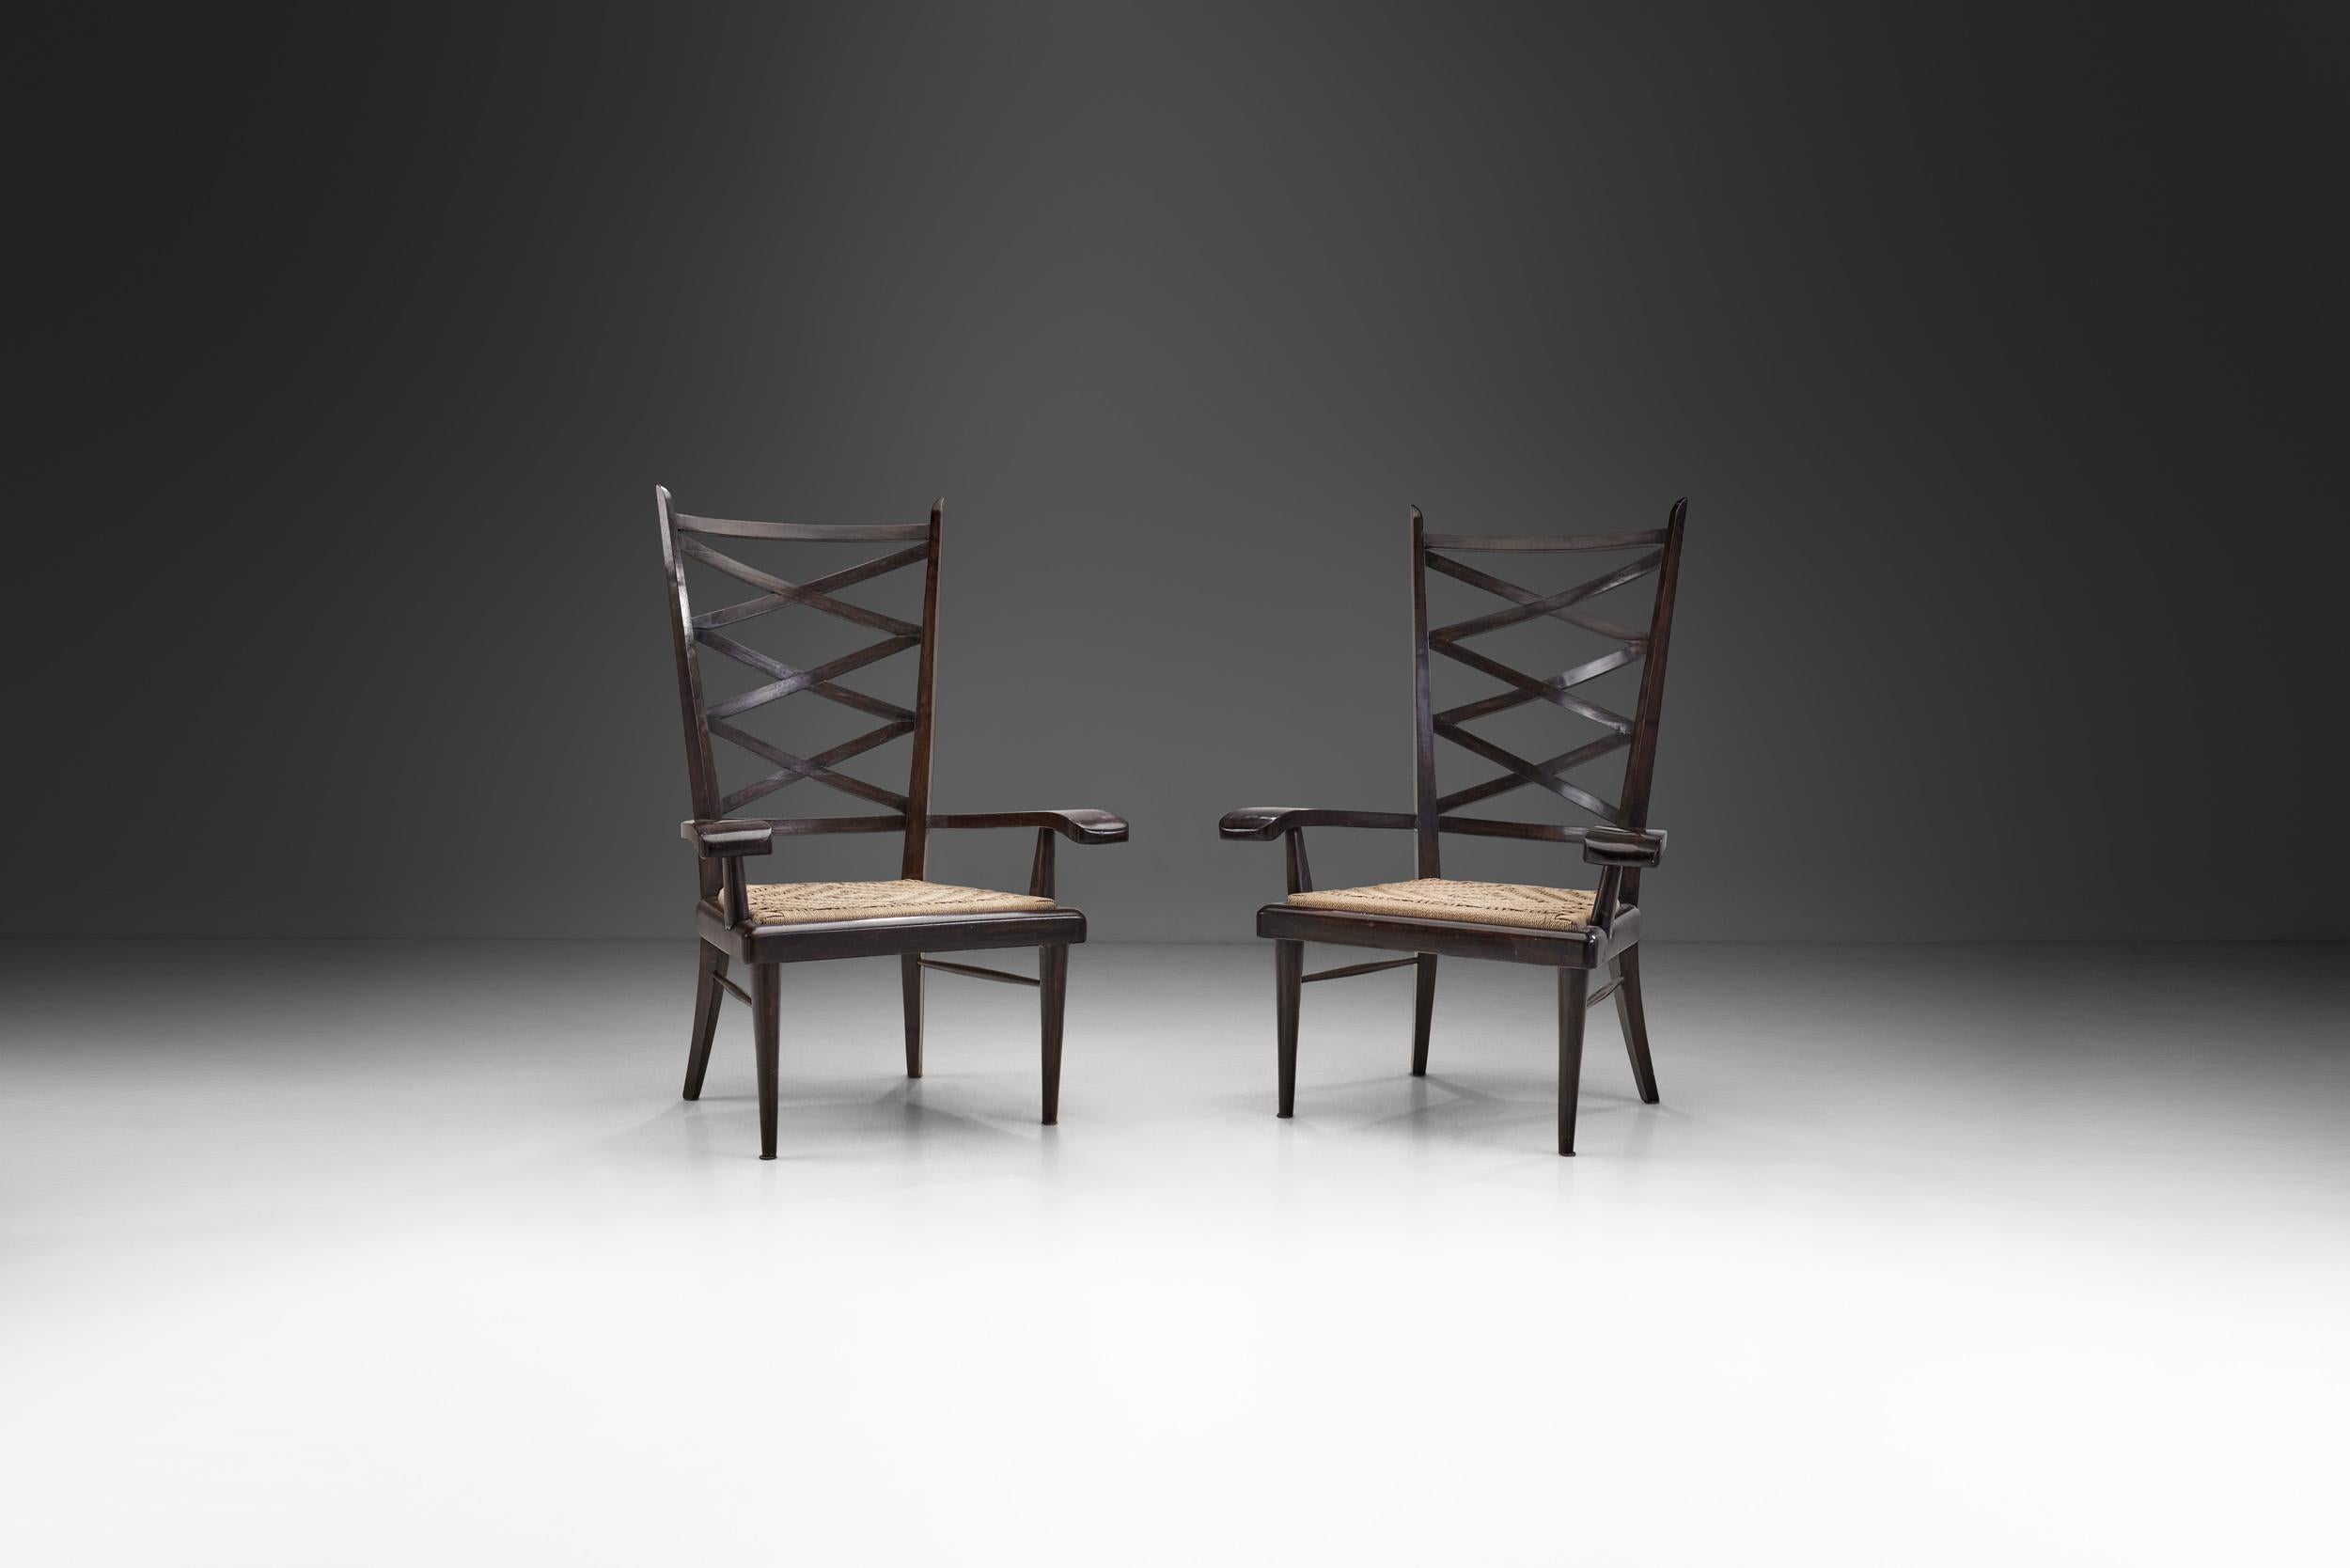 This pair of armchairs stands as evidence why Italian design looked back to organic forms during the 1970s. While many early 1970s furniture designs took cues from the Art Deco shapes and forms, a more understated style also became desired bringing